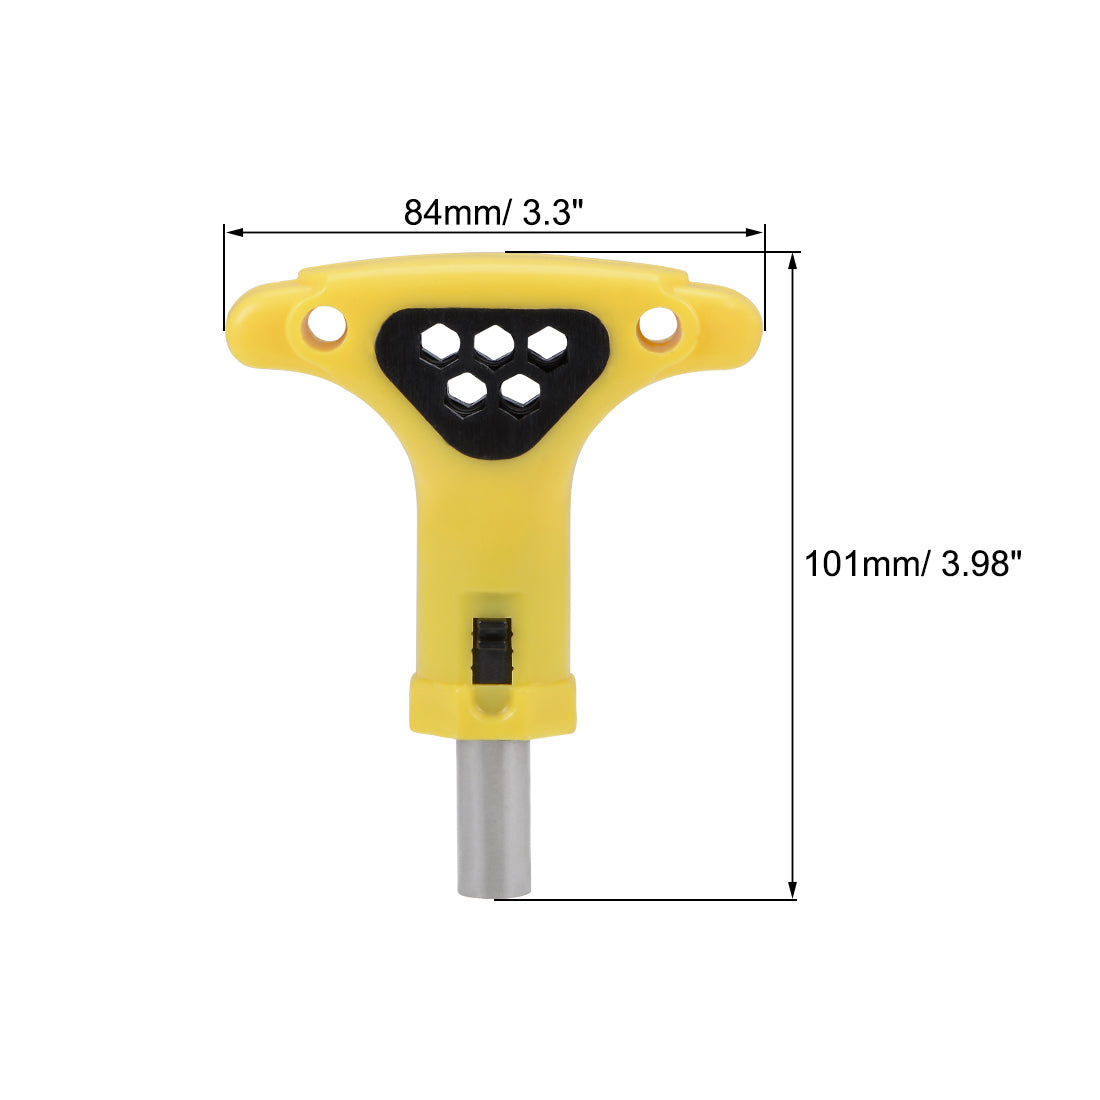 uxcell Uxcell Ratchet Screwdriver Adjustable T Shape Wrench Multifunctional Non-Slip Handle for 1/4 Inch Hex Screwdriver Bits Set